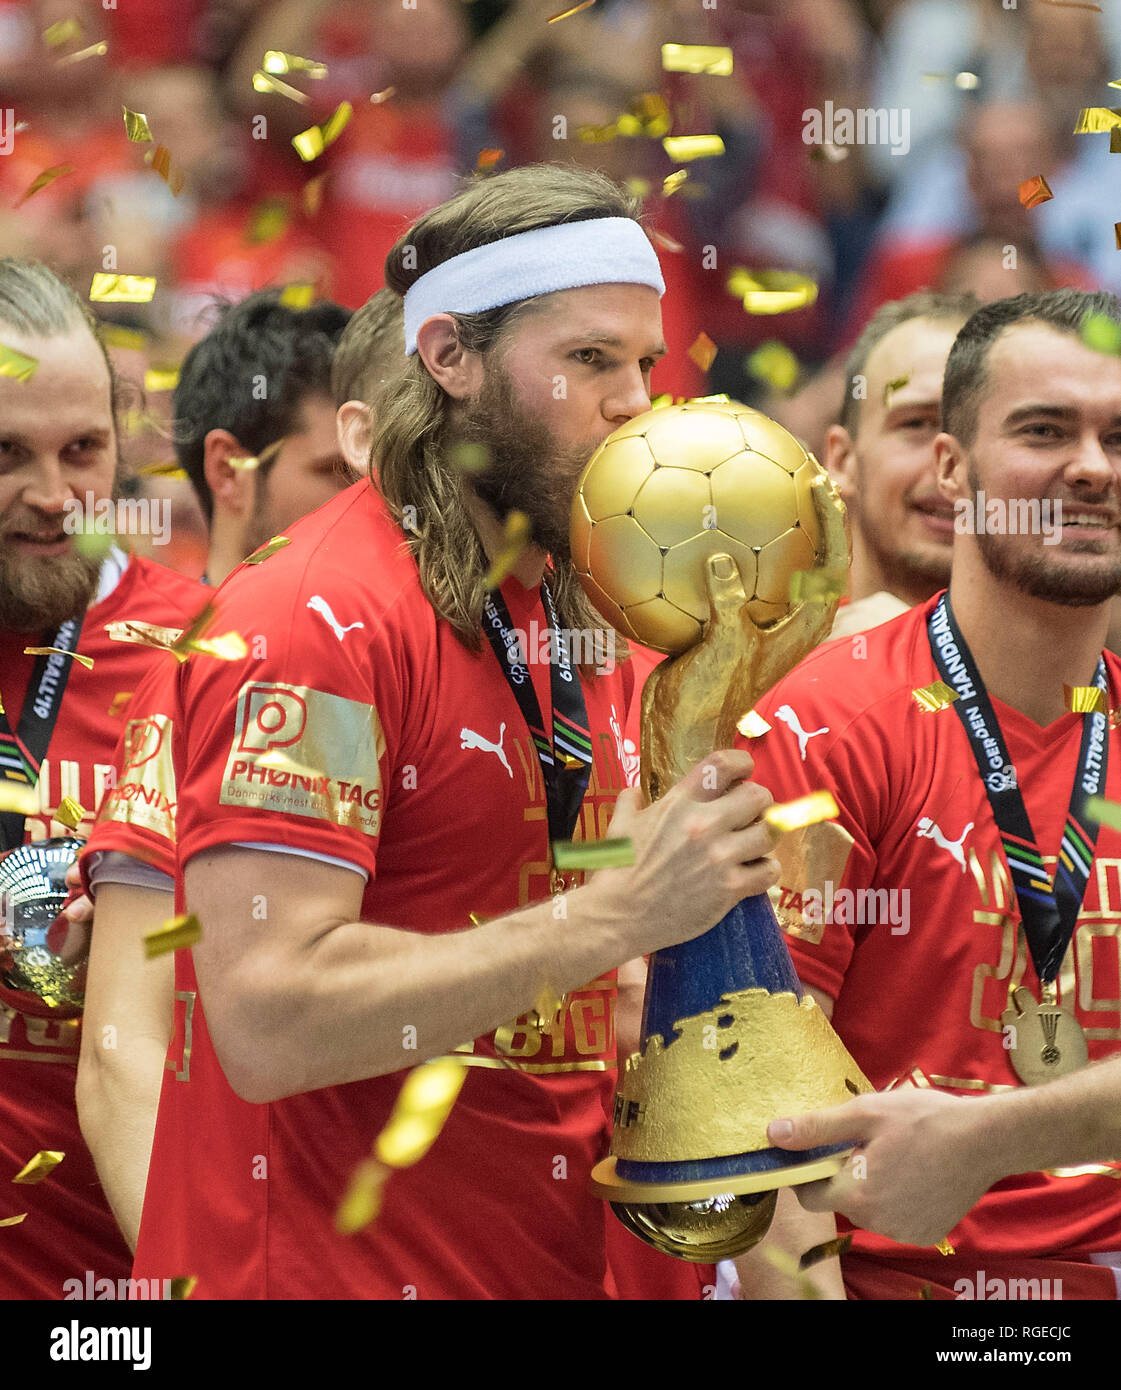 Award Ceremony, Mikkel HANSEN (DEN) kisses the Cup, Final, Norway (NOR) - Denmark (DEN), on 27.01.2019 in Handball World Cup 2019, from 10.01. - 27.01.2019 in Germany/Denmark. | usage worldwide Stock - Alamy